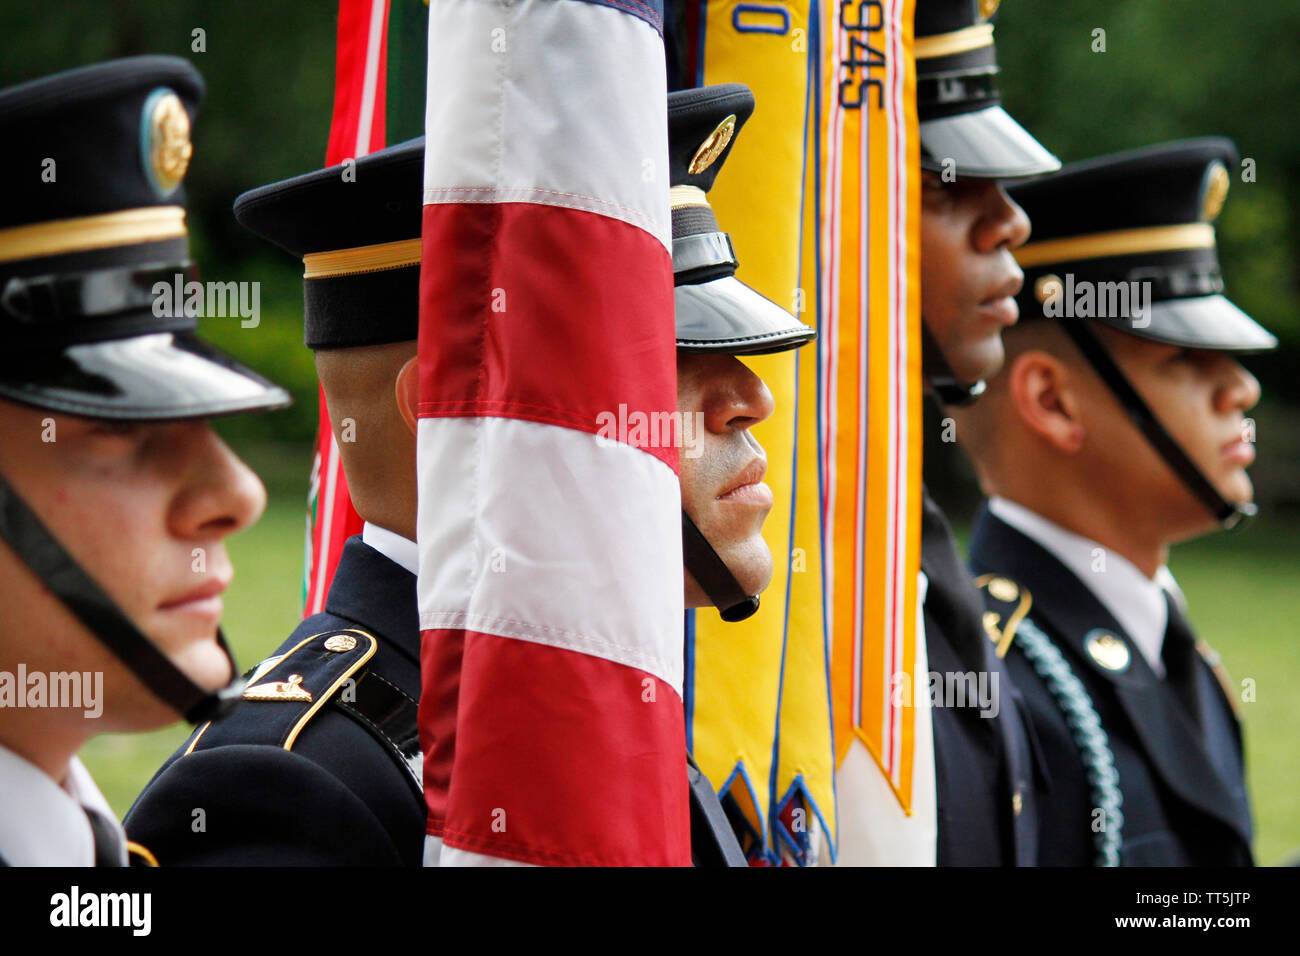 Philadelphia, PA, USA - June 14, 2019: Active members of the U.S. Armed Forces, veterans and historical re-enactors commemorate Flag Day at the National Constitution Center, in Philadelphia, Pennsylvania. Credit: OOgImages/Alamy Live News Stock Photo